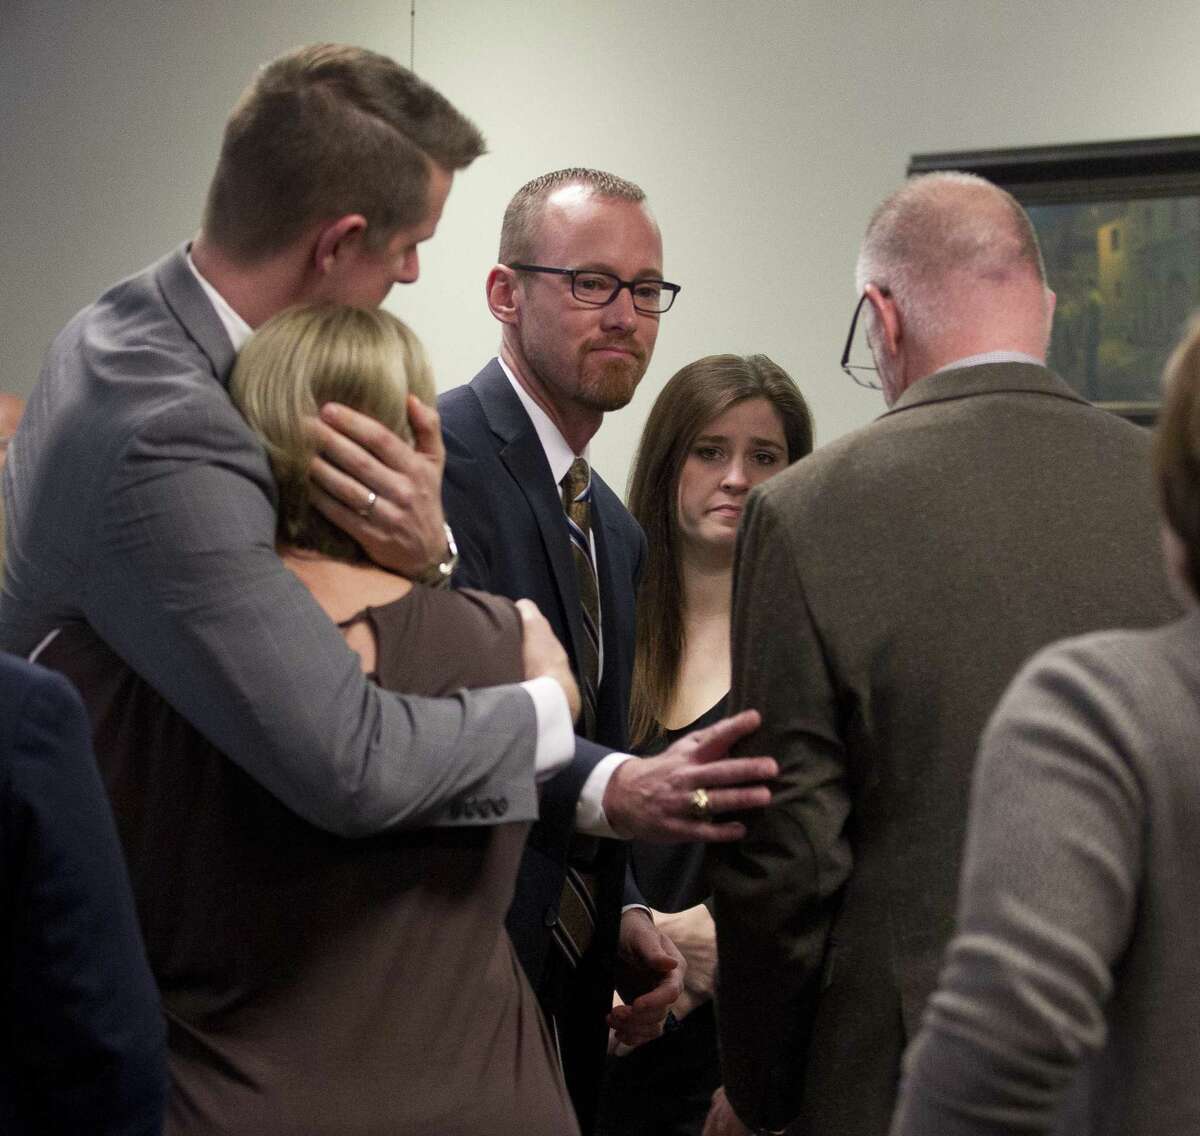 Marjorie Hantz, mother of Melinda Sedlmeier, is comforted by Chief Vehicular Crimes Prosecutor Andrew James as Tyler Dunman, chief prosecutor with the Montgomery County District Attorney's Office, comforts Charlie Lumpkin, brother-in-law of Roland Sedlmeier, following a sentencing hearing for Ronald Cooper in the 359th state District Court at the Montgomery County Courthouse, Friday, May 5, 2017, in Conroe. Cooper was handed an 80-year prison sentence for causing the 2015 crash that killed Roland Sedlmeier, 49, Melinda Sedlmeier, 42, Harley Sedlmeier, 6, and Sofie Sedlmeier, 4, all of whom were on their way home from church on Texas 105 at the time of the crash. Two teenagers were also injured in the wreck.